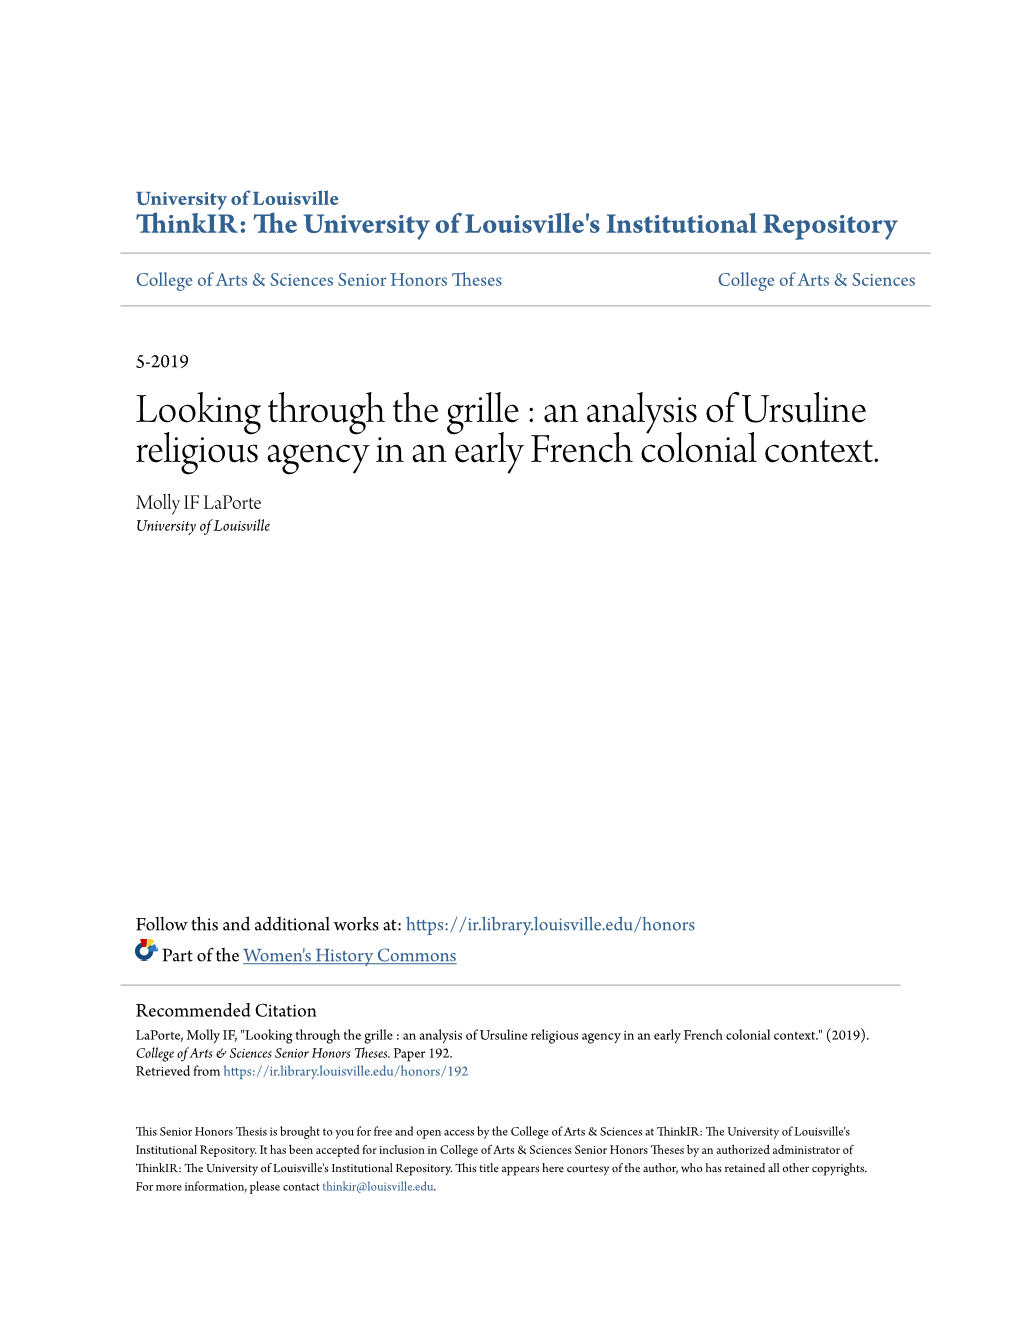 An Analysis of Ursuline Religious Agency in an Early French Colonial Context. Molly IF Laporte University of Louisville